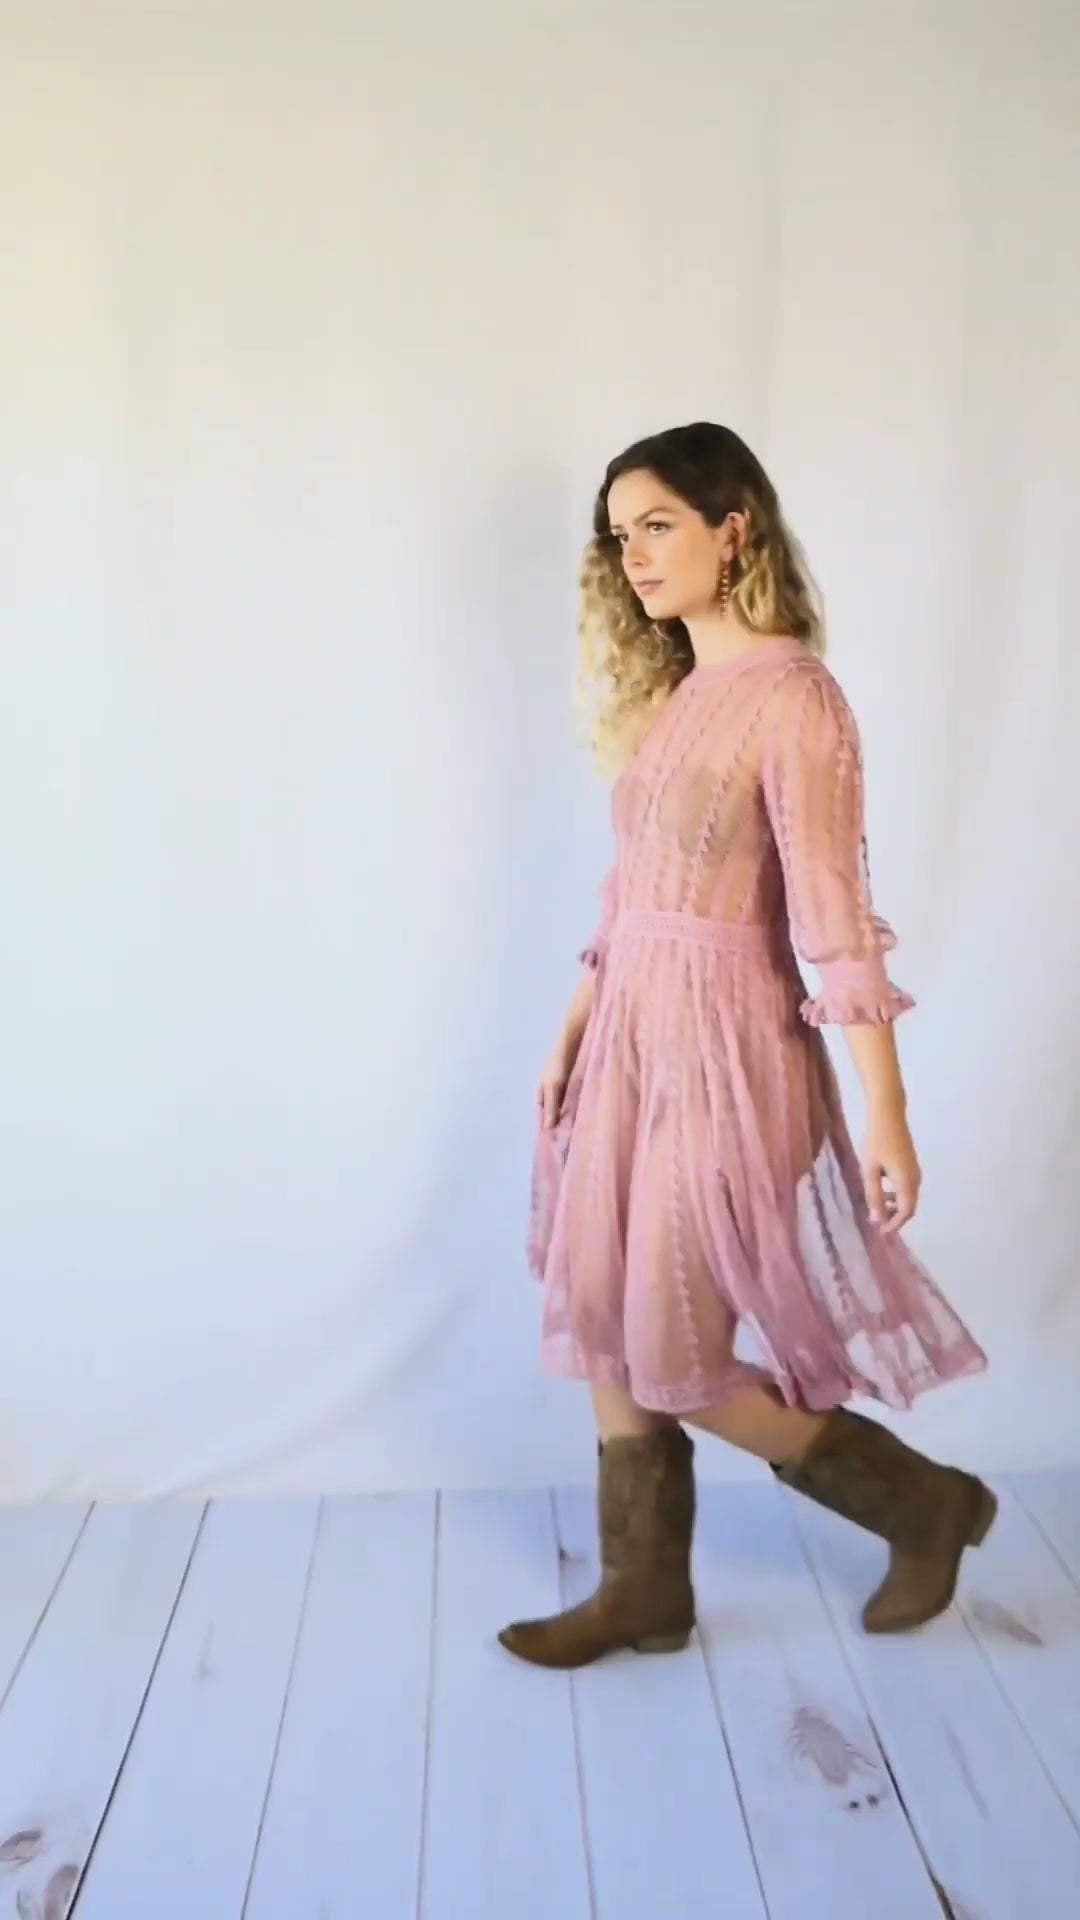 Video of model twirling around in midi length rose colored Lim's Vintage crochet dress.  